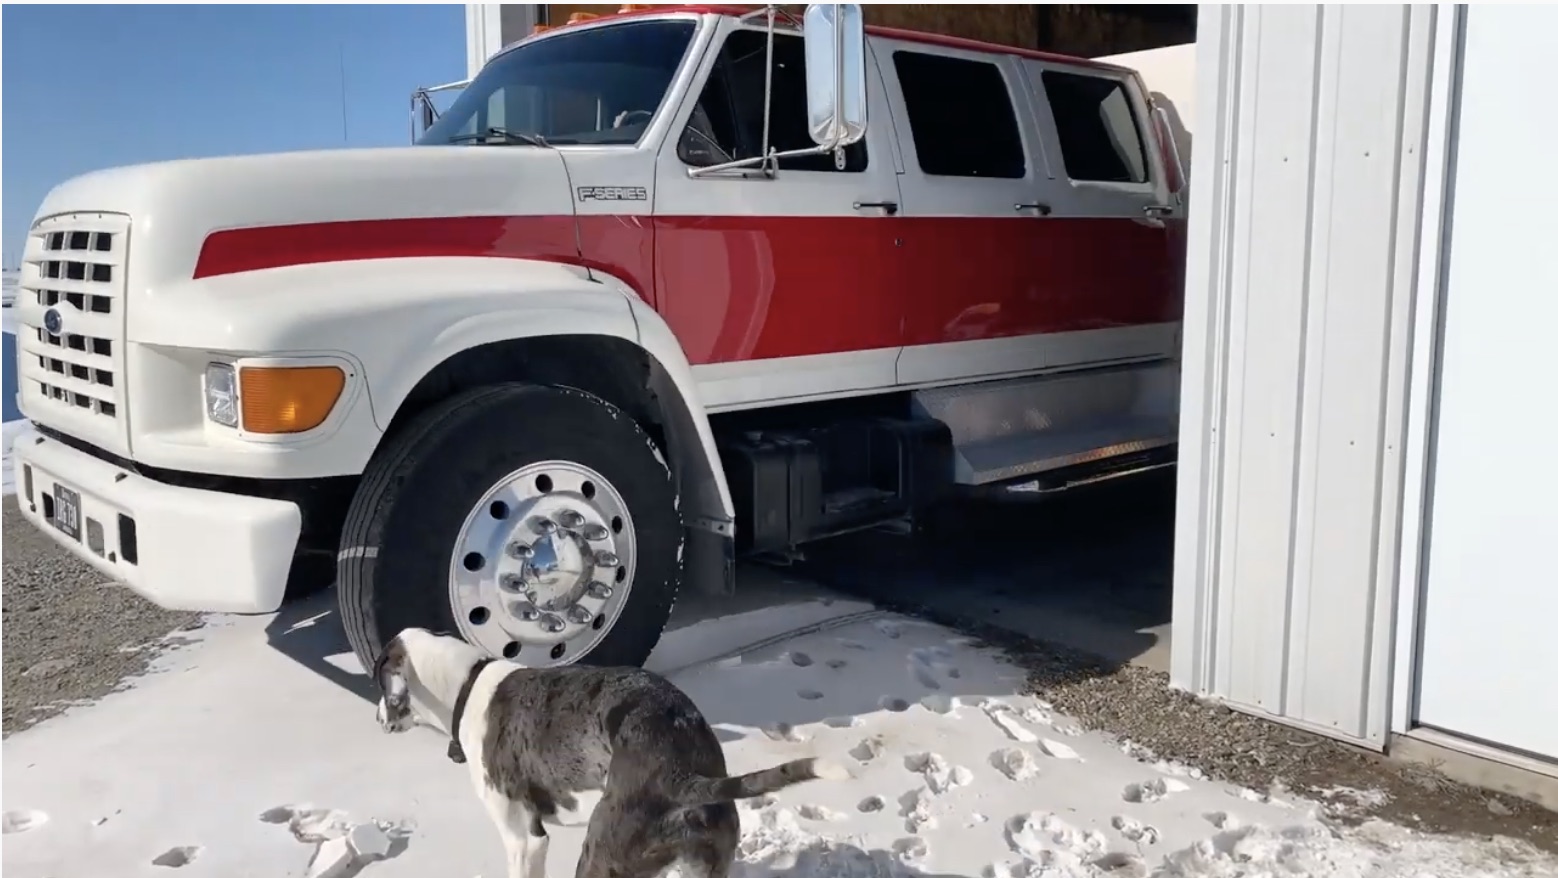 Yet Another Fix: Finnegan Gets Another Giant Truck…This Time A Six-Door Ford!